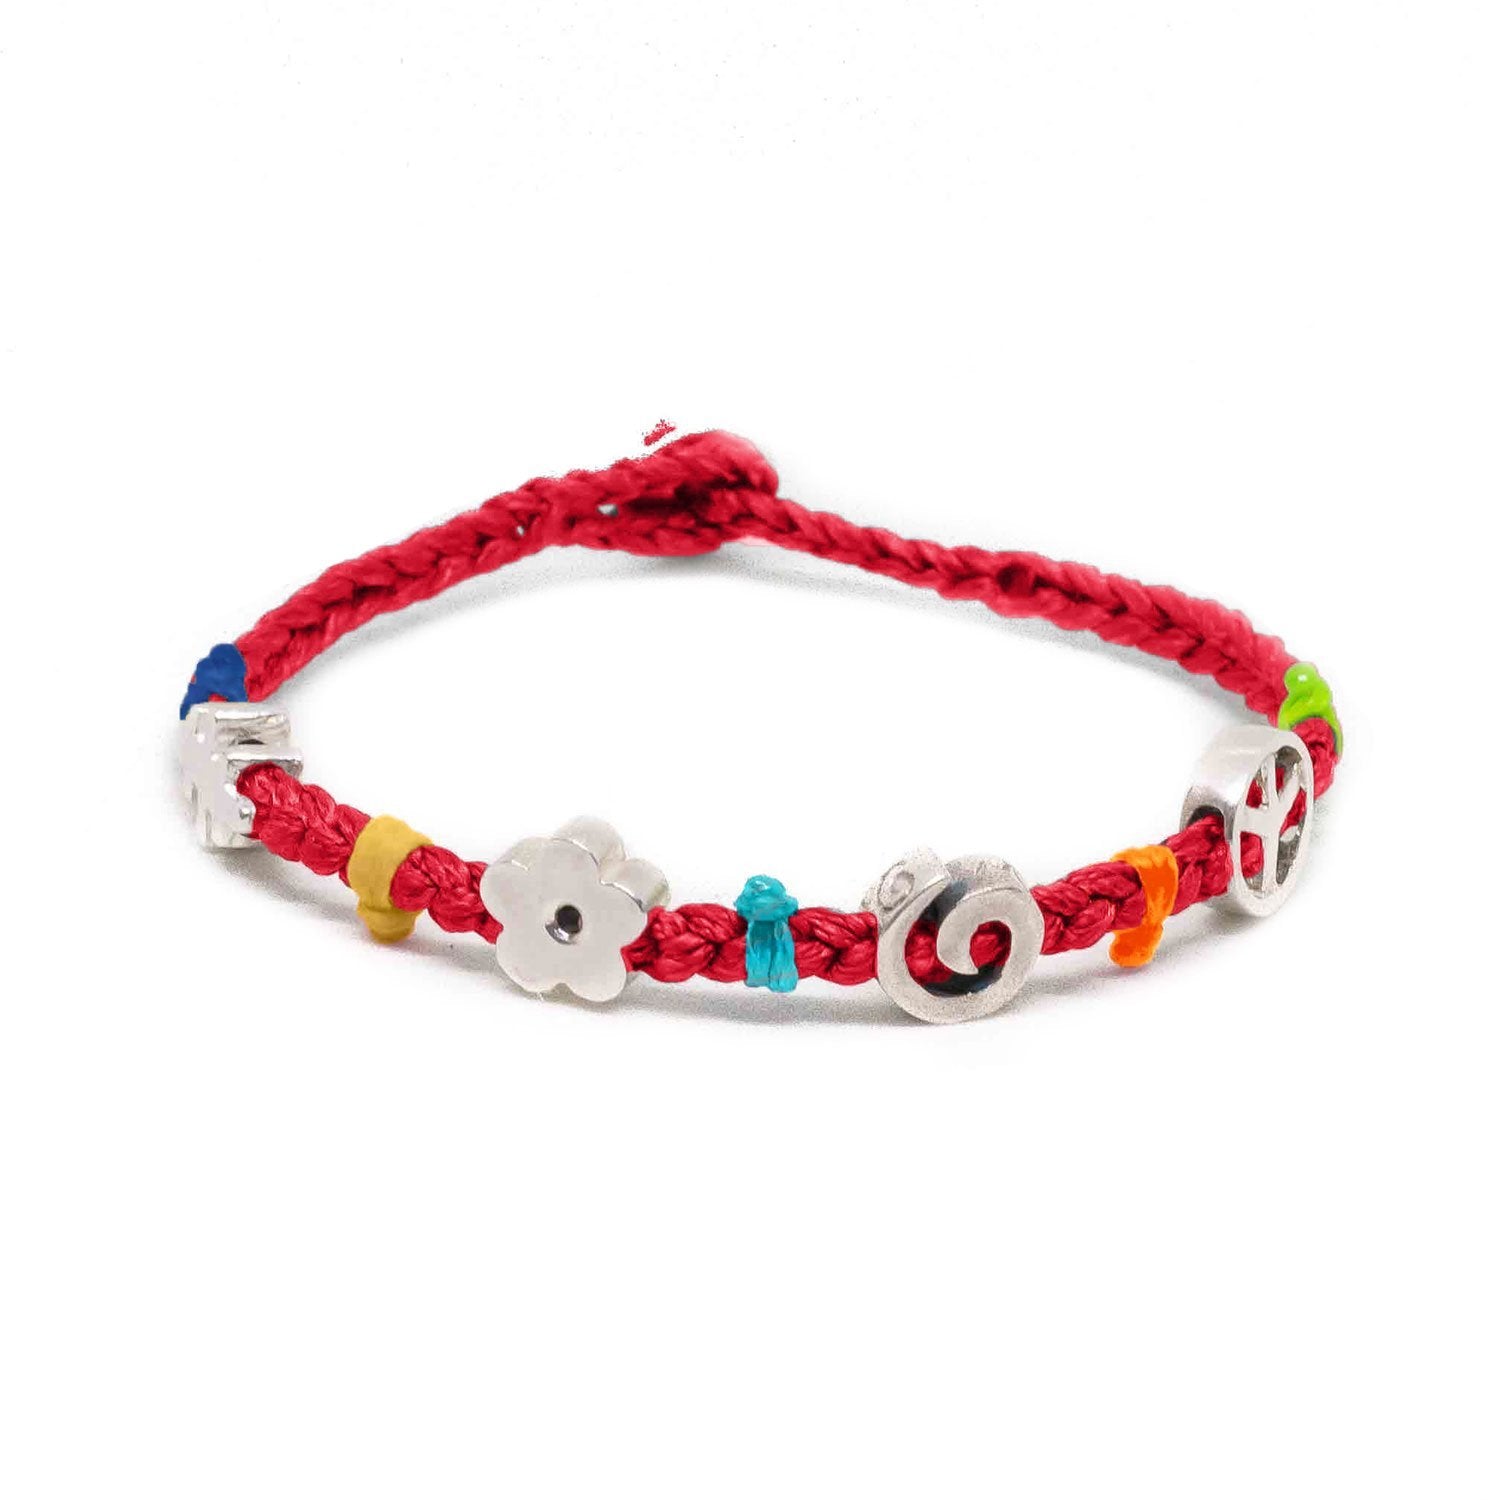 Red, hand beaded string bracelet with silver beads which are the symbols of soul, peace, flower and communication